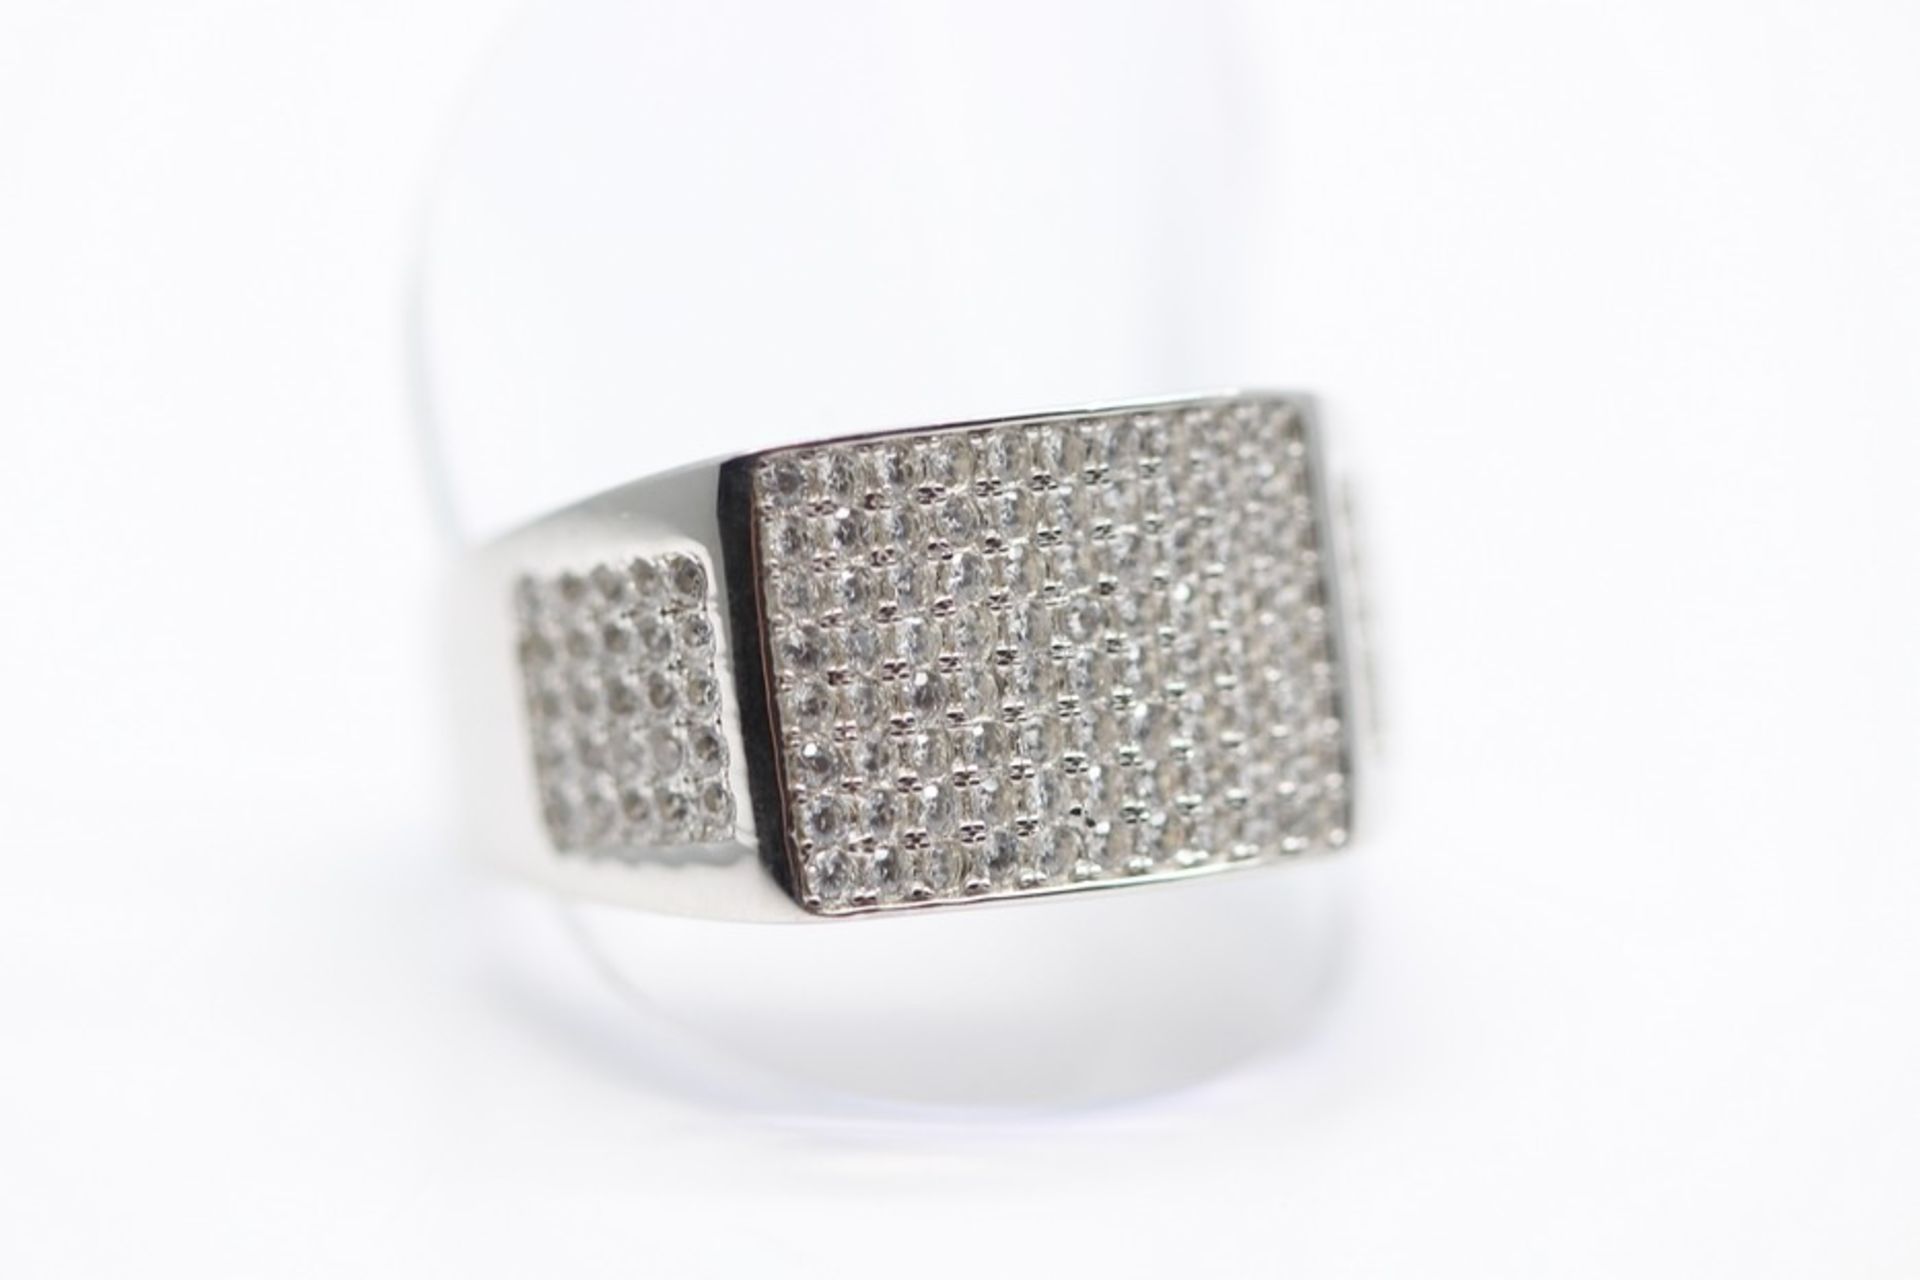 1 x BOXED BRAND NEW SOLID SILVER GENTS RING SET WITH AAA+ BRILLIANT CUT SIMULATED DIAMONDS WITH AAA+